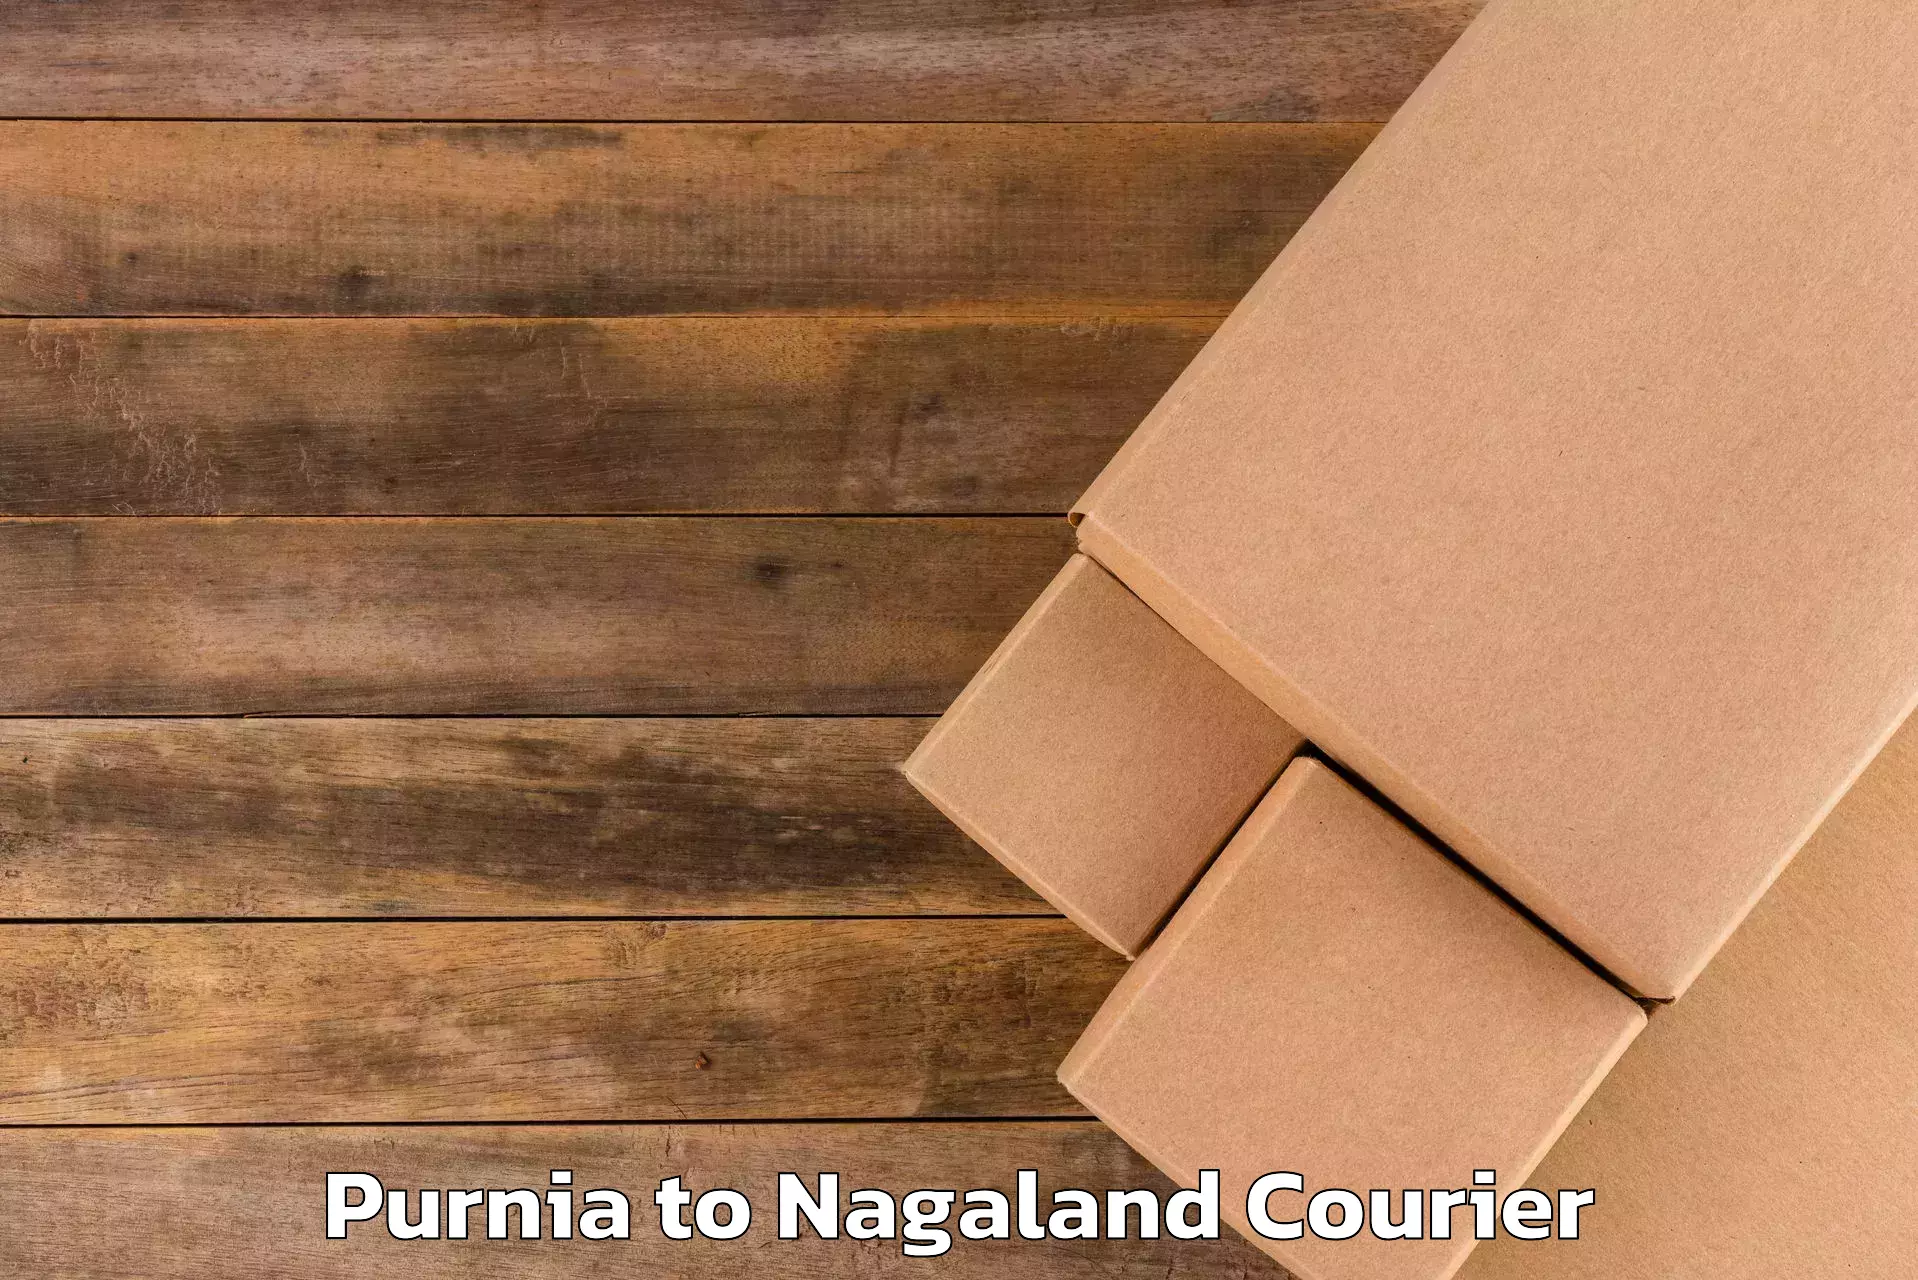 Luggage delivery app Purnia to Nagaland